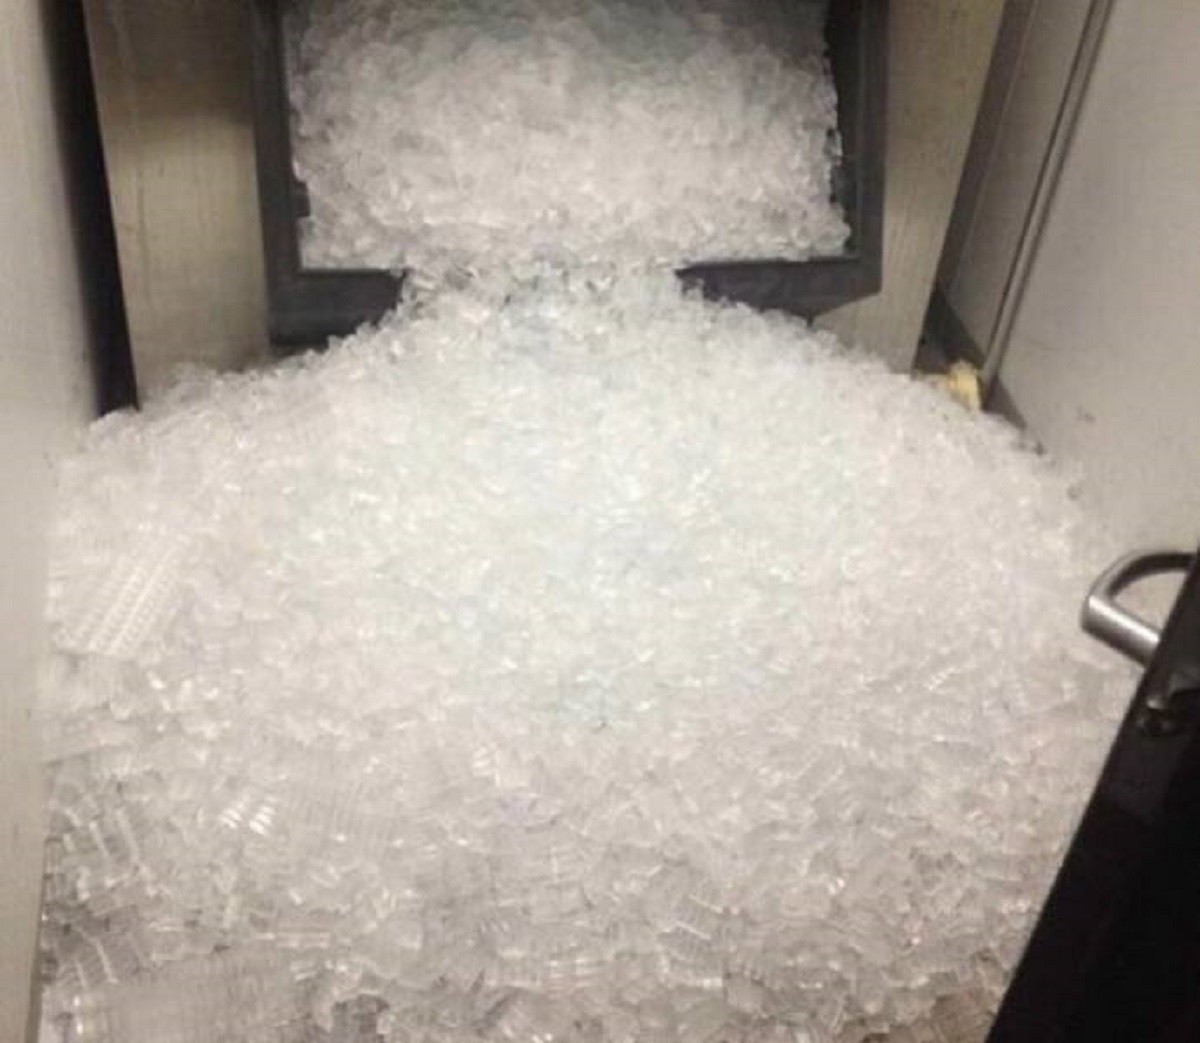 "Coming Into Work To Discover That Someone Left The Ice Machine's Door Open Overnight"